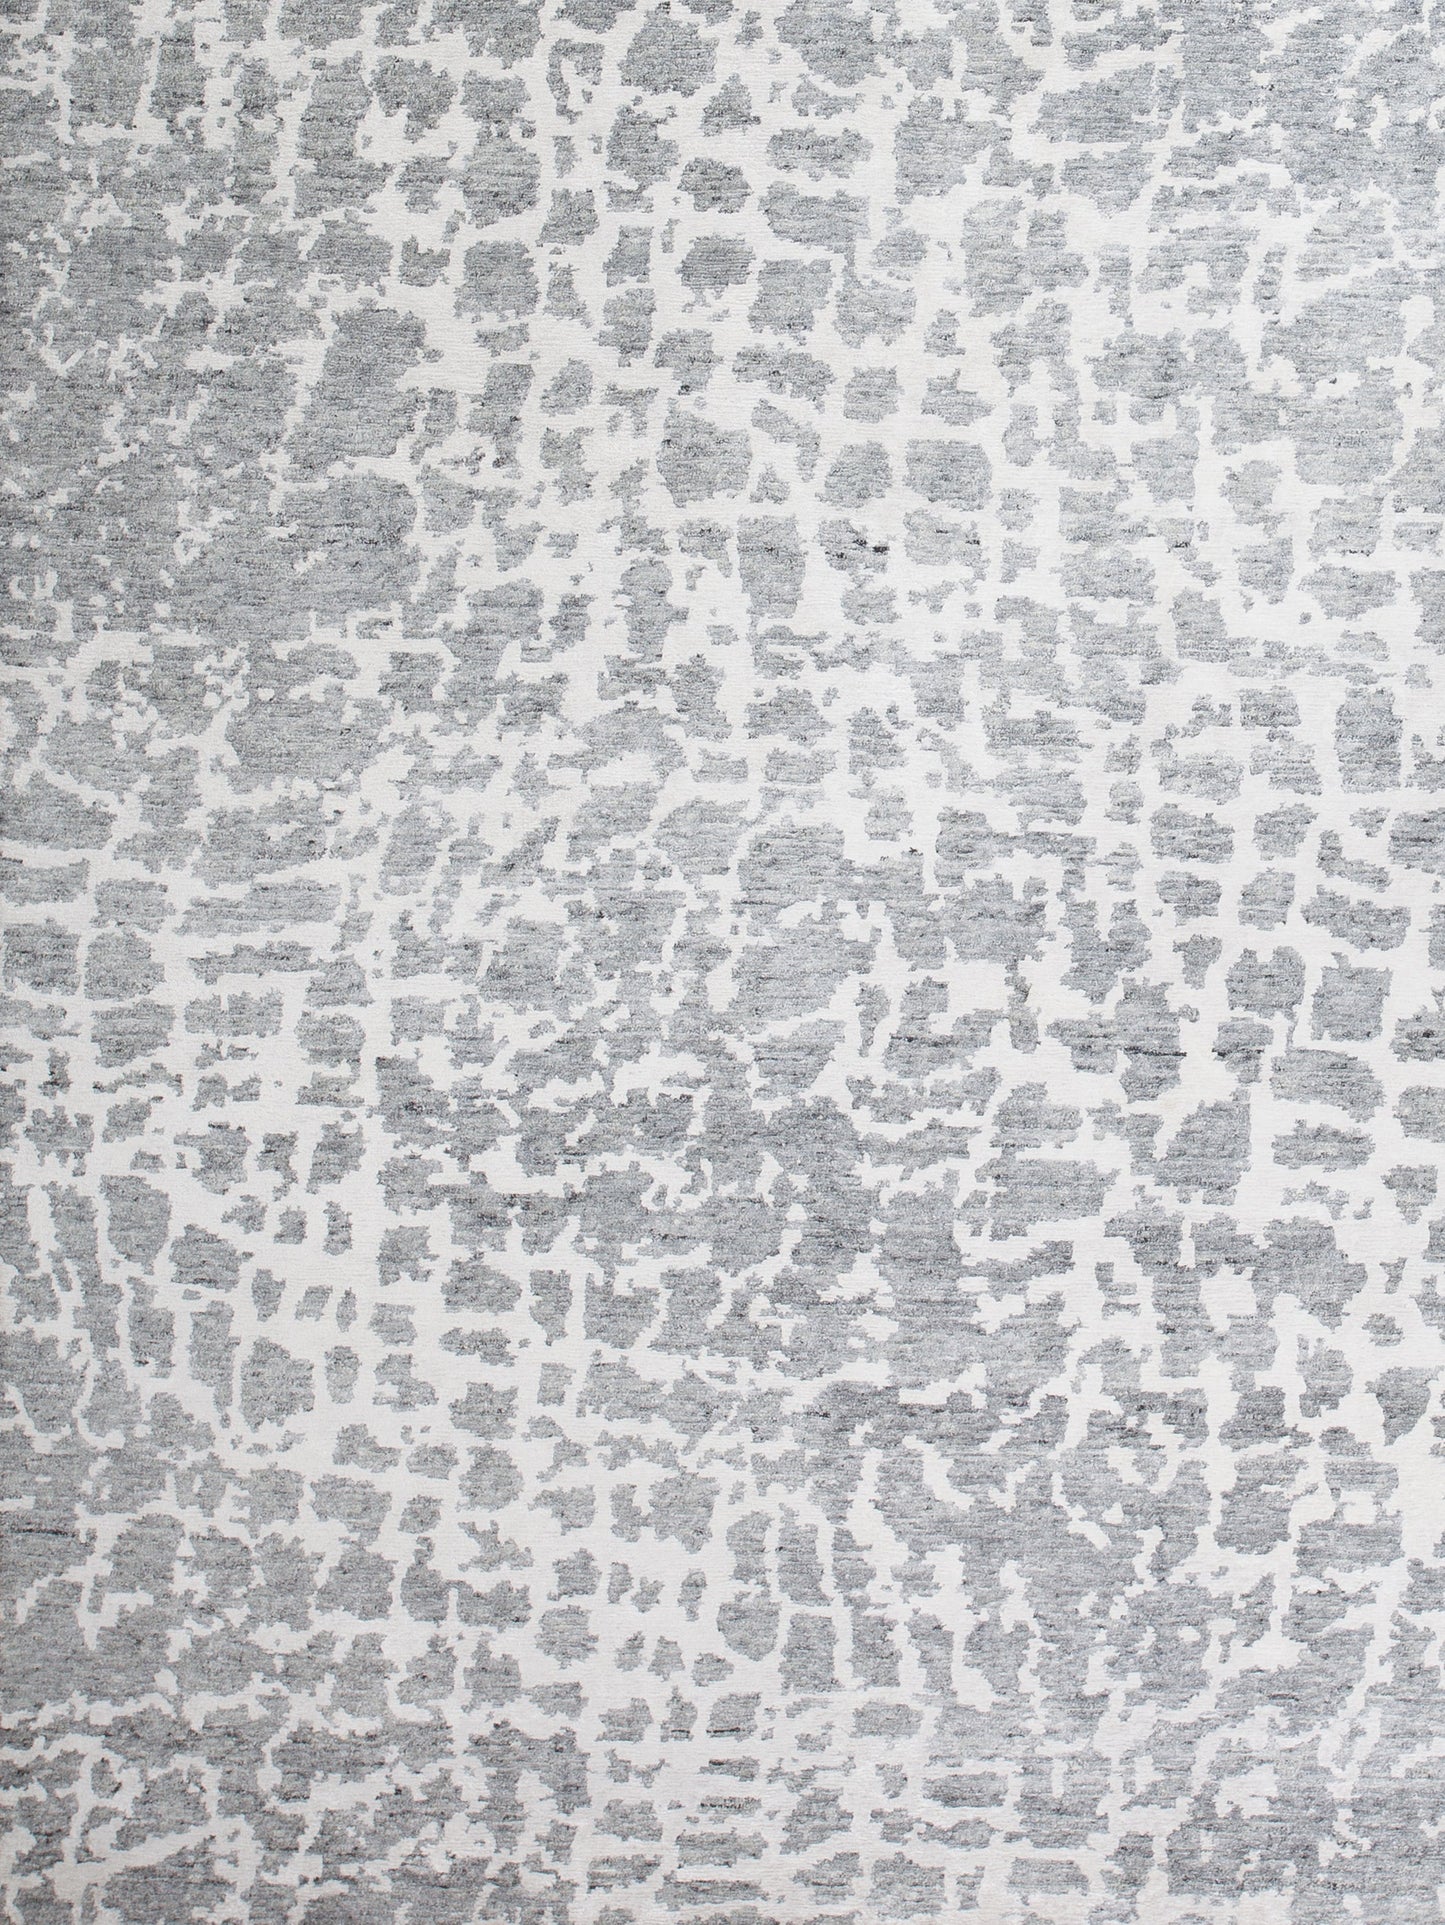 The center's close-up displays the comfy texture of this contemporary rug.